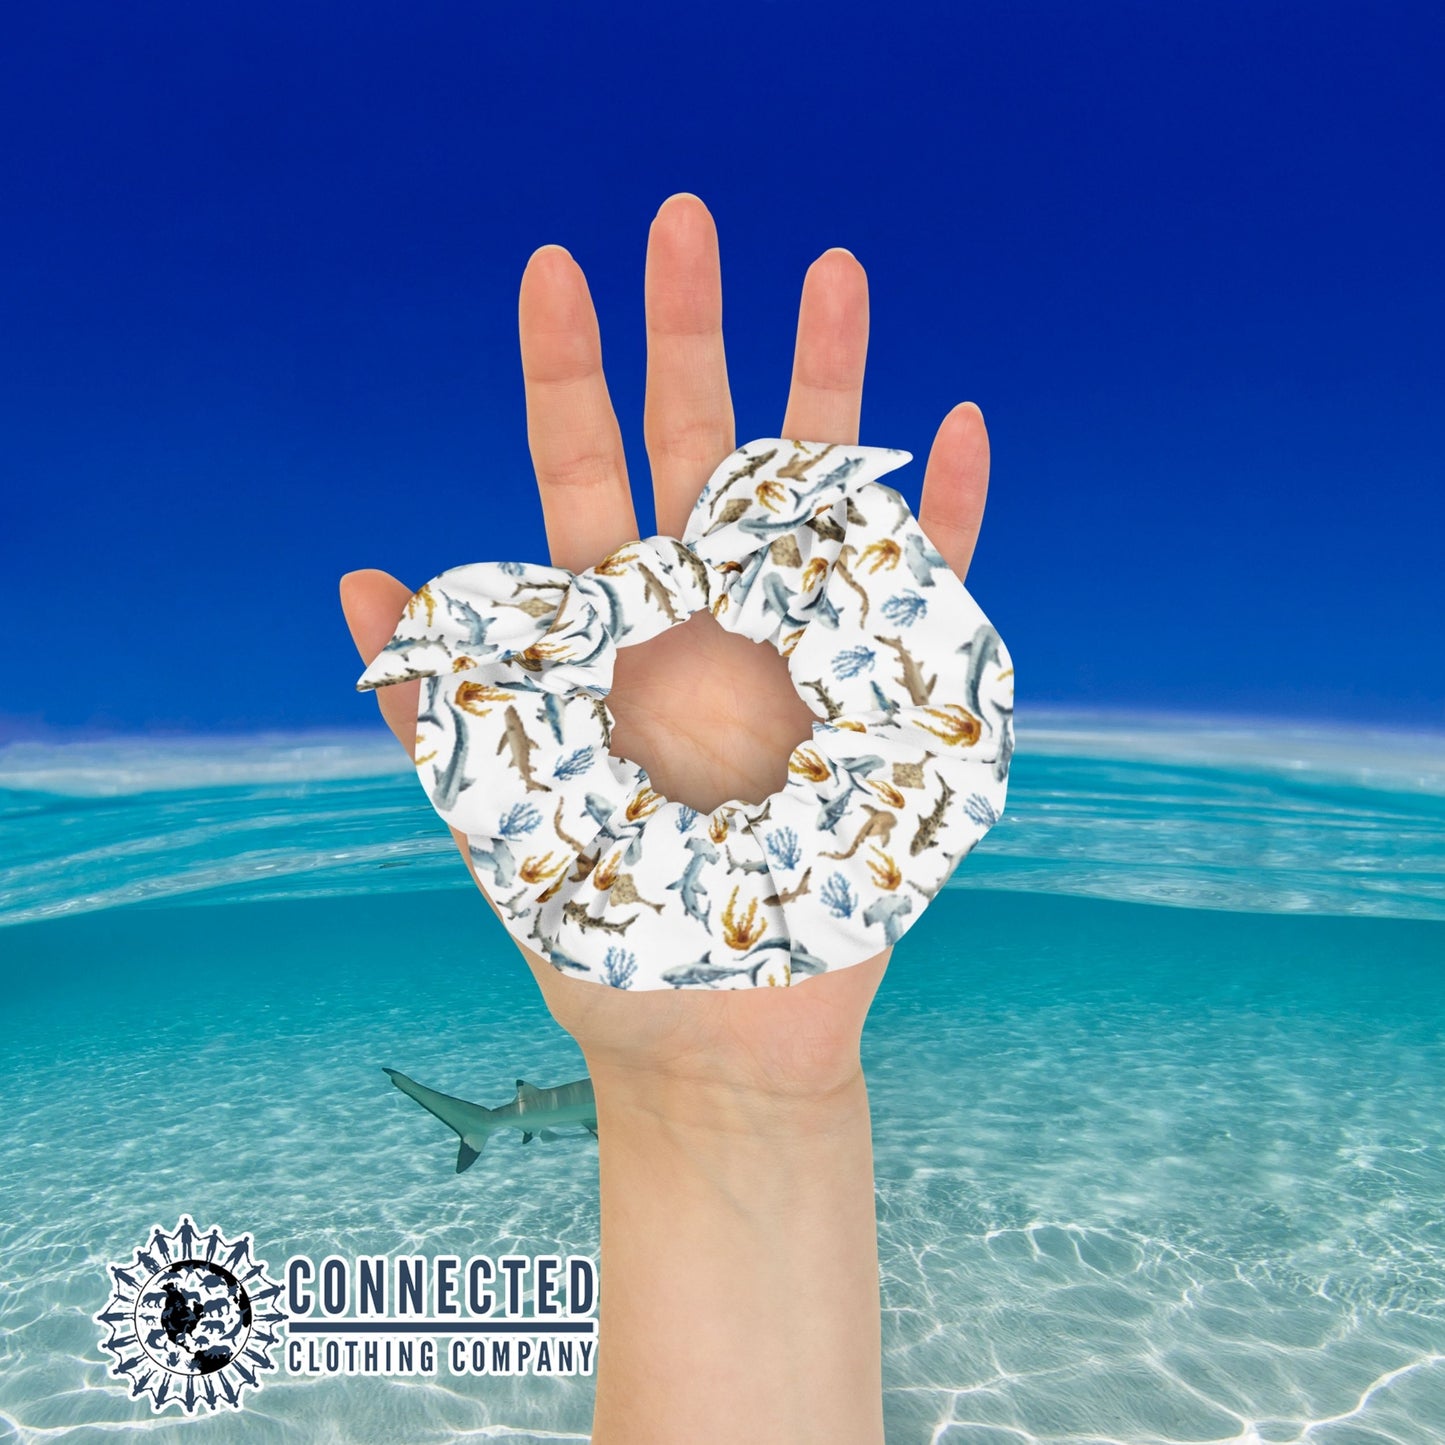 Shark Watercolor Scrunchie - Connected Clothing Company - 10% of proceeds donated to shark conservation